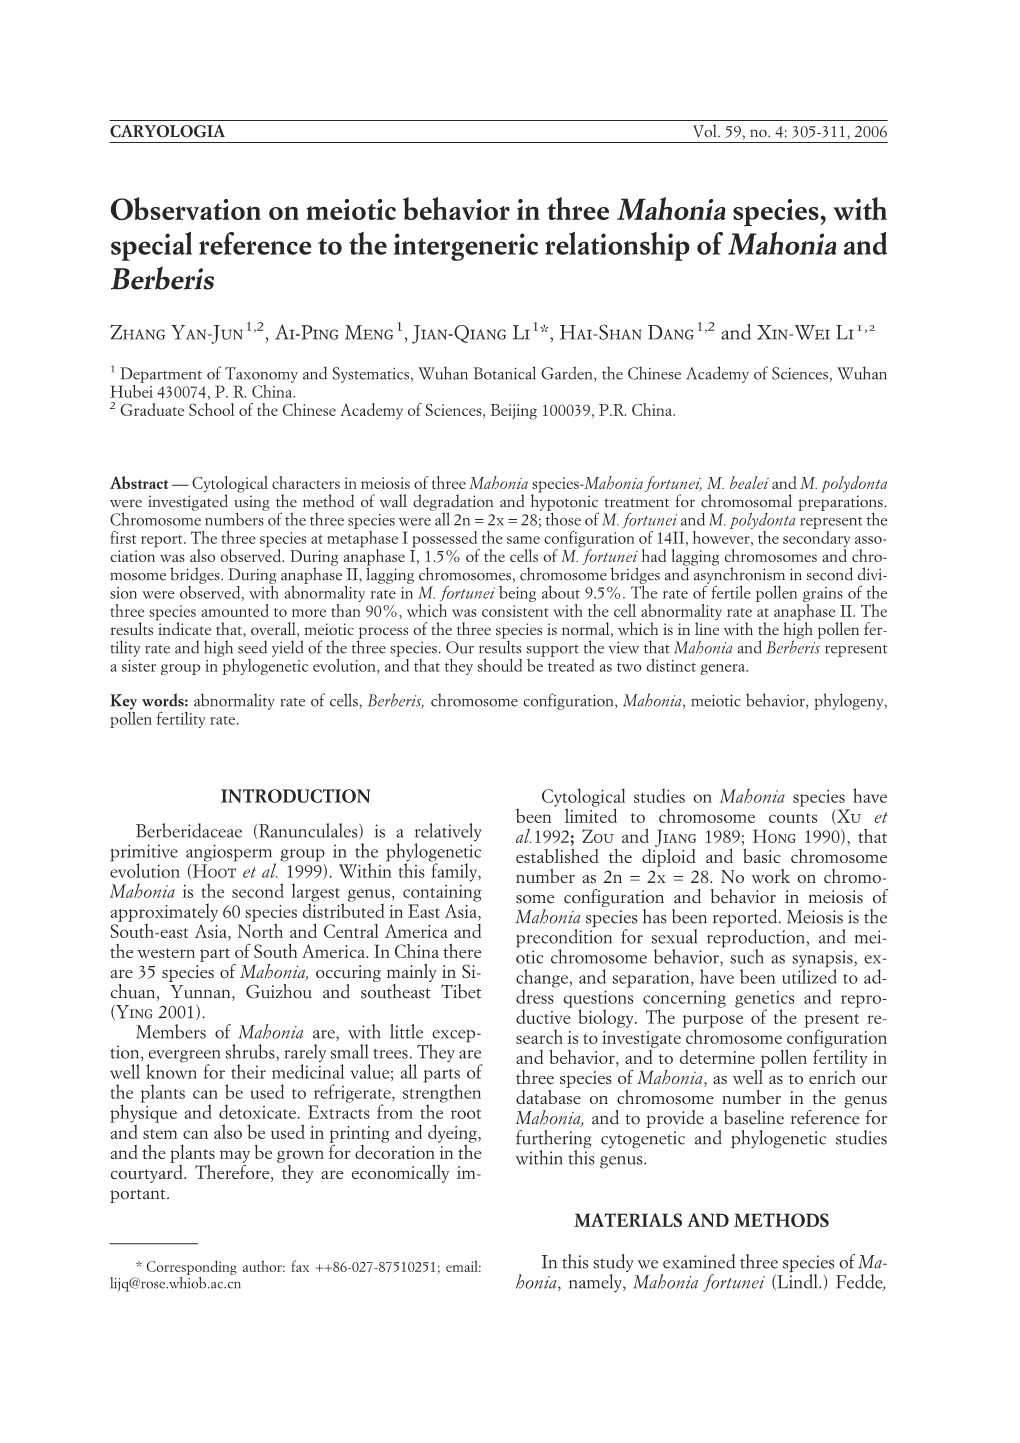 Observation on Meiotic Behavior in Three Mahonia Species, with Special Reference to the Intergeneric Relationship of Mahonia and Berberis